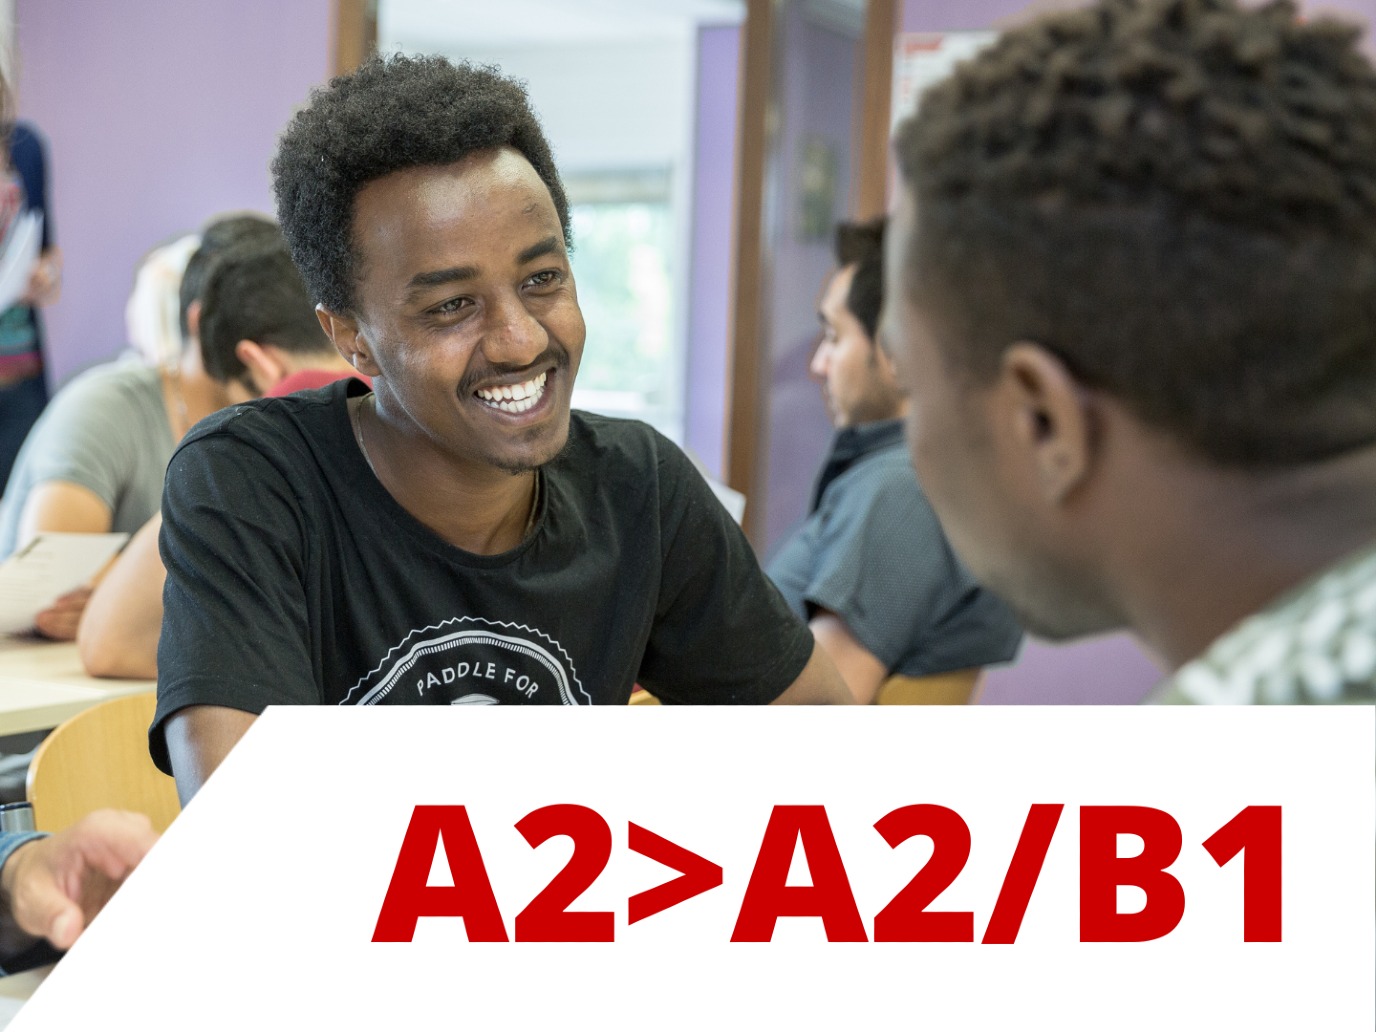 Dutch A2>A2/B1 for newcomers: civic integration 